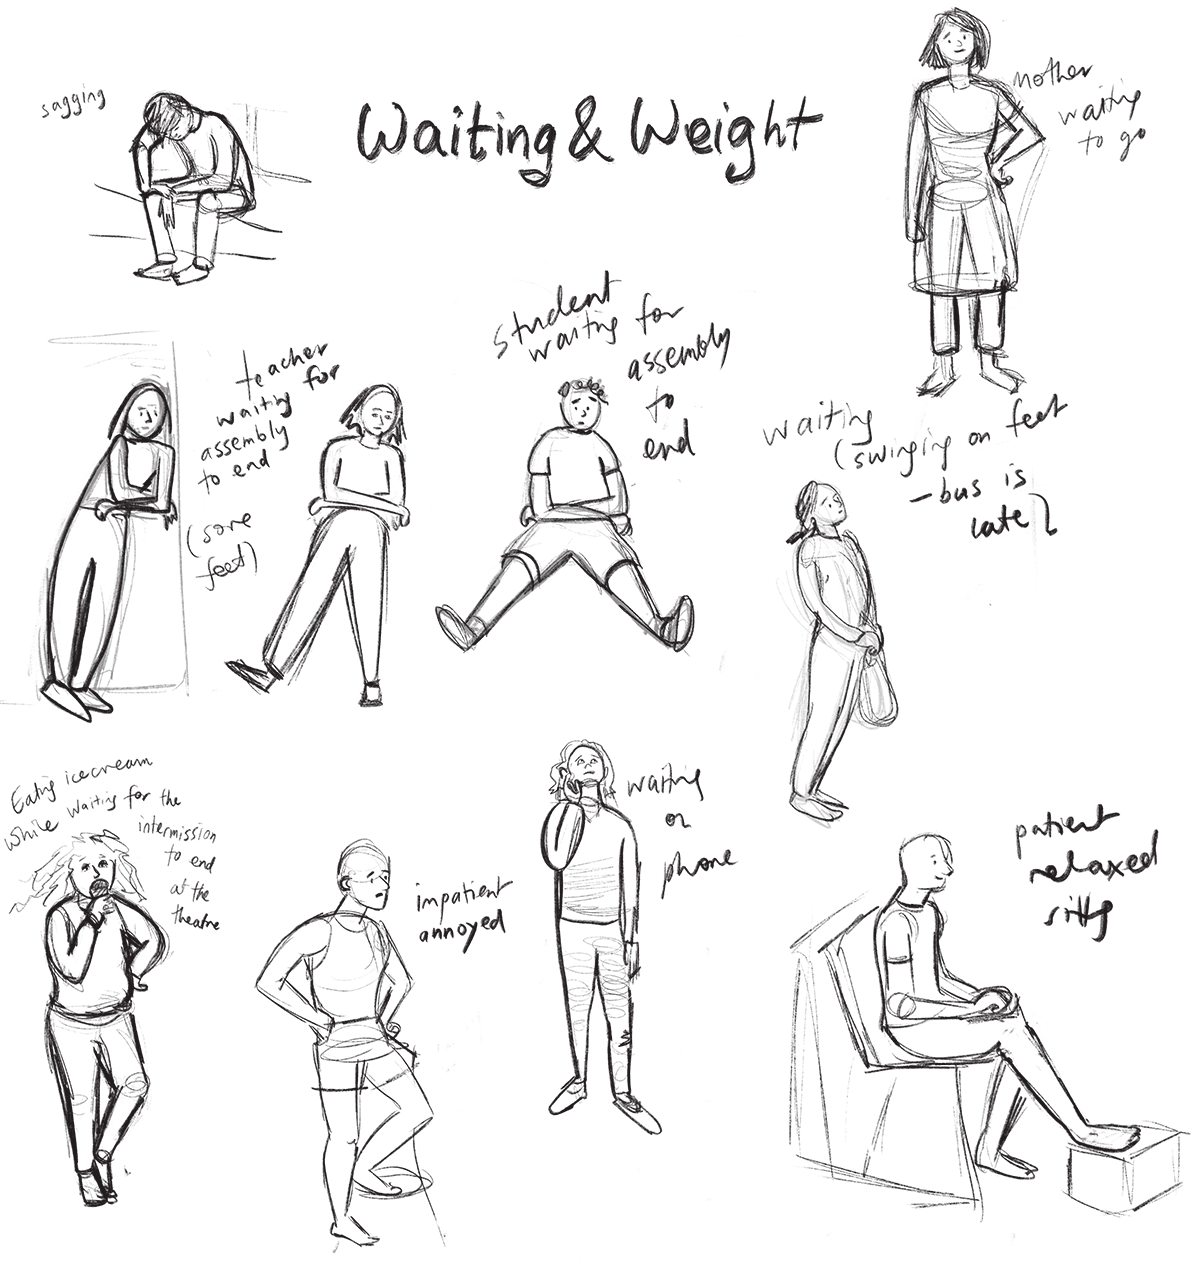 intro_to_gesture_waiting_And_Weight.png